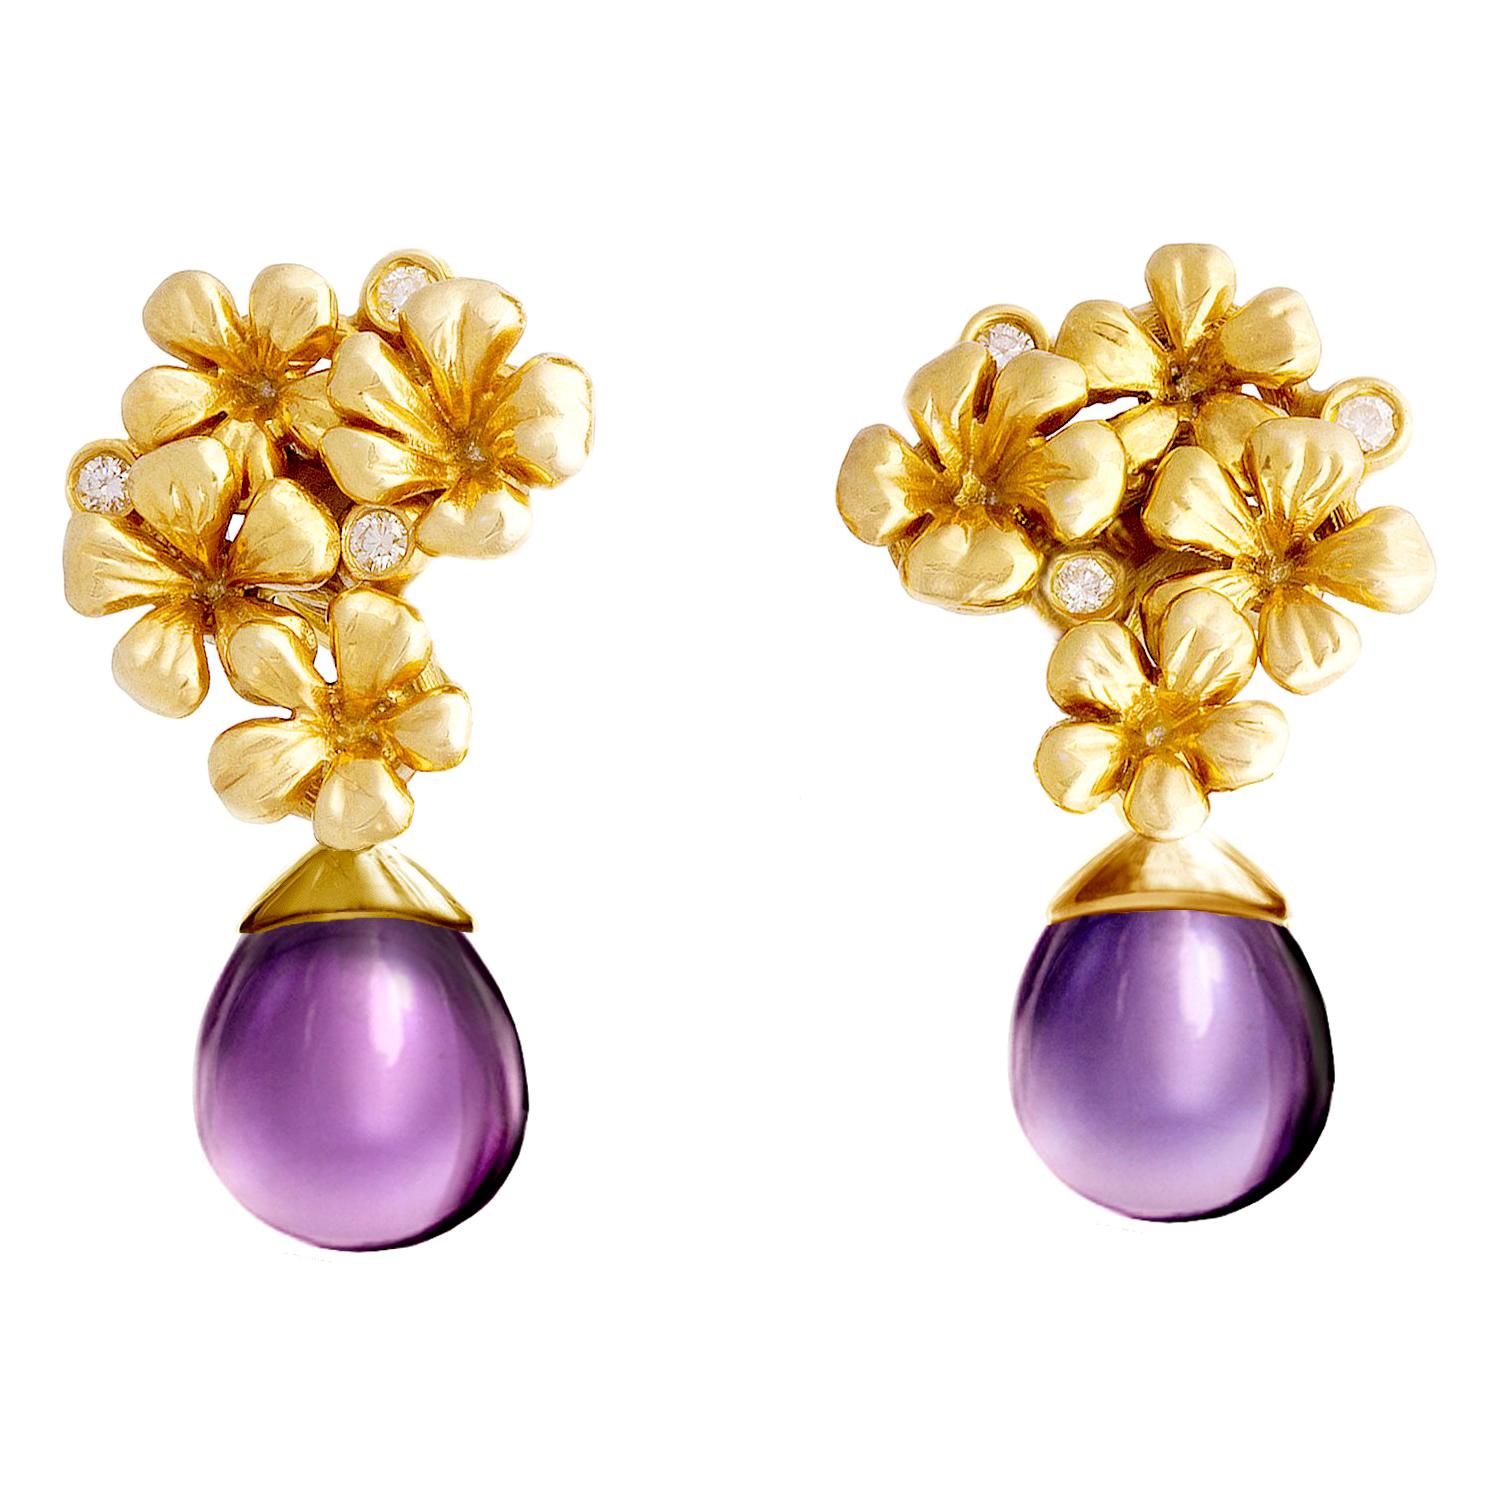 Yellow Gold Designer Blossom Clip-on Earrings with Removable Drops of Amethysts